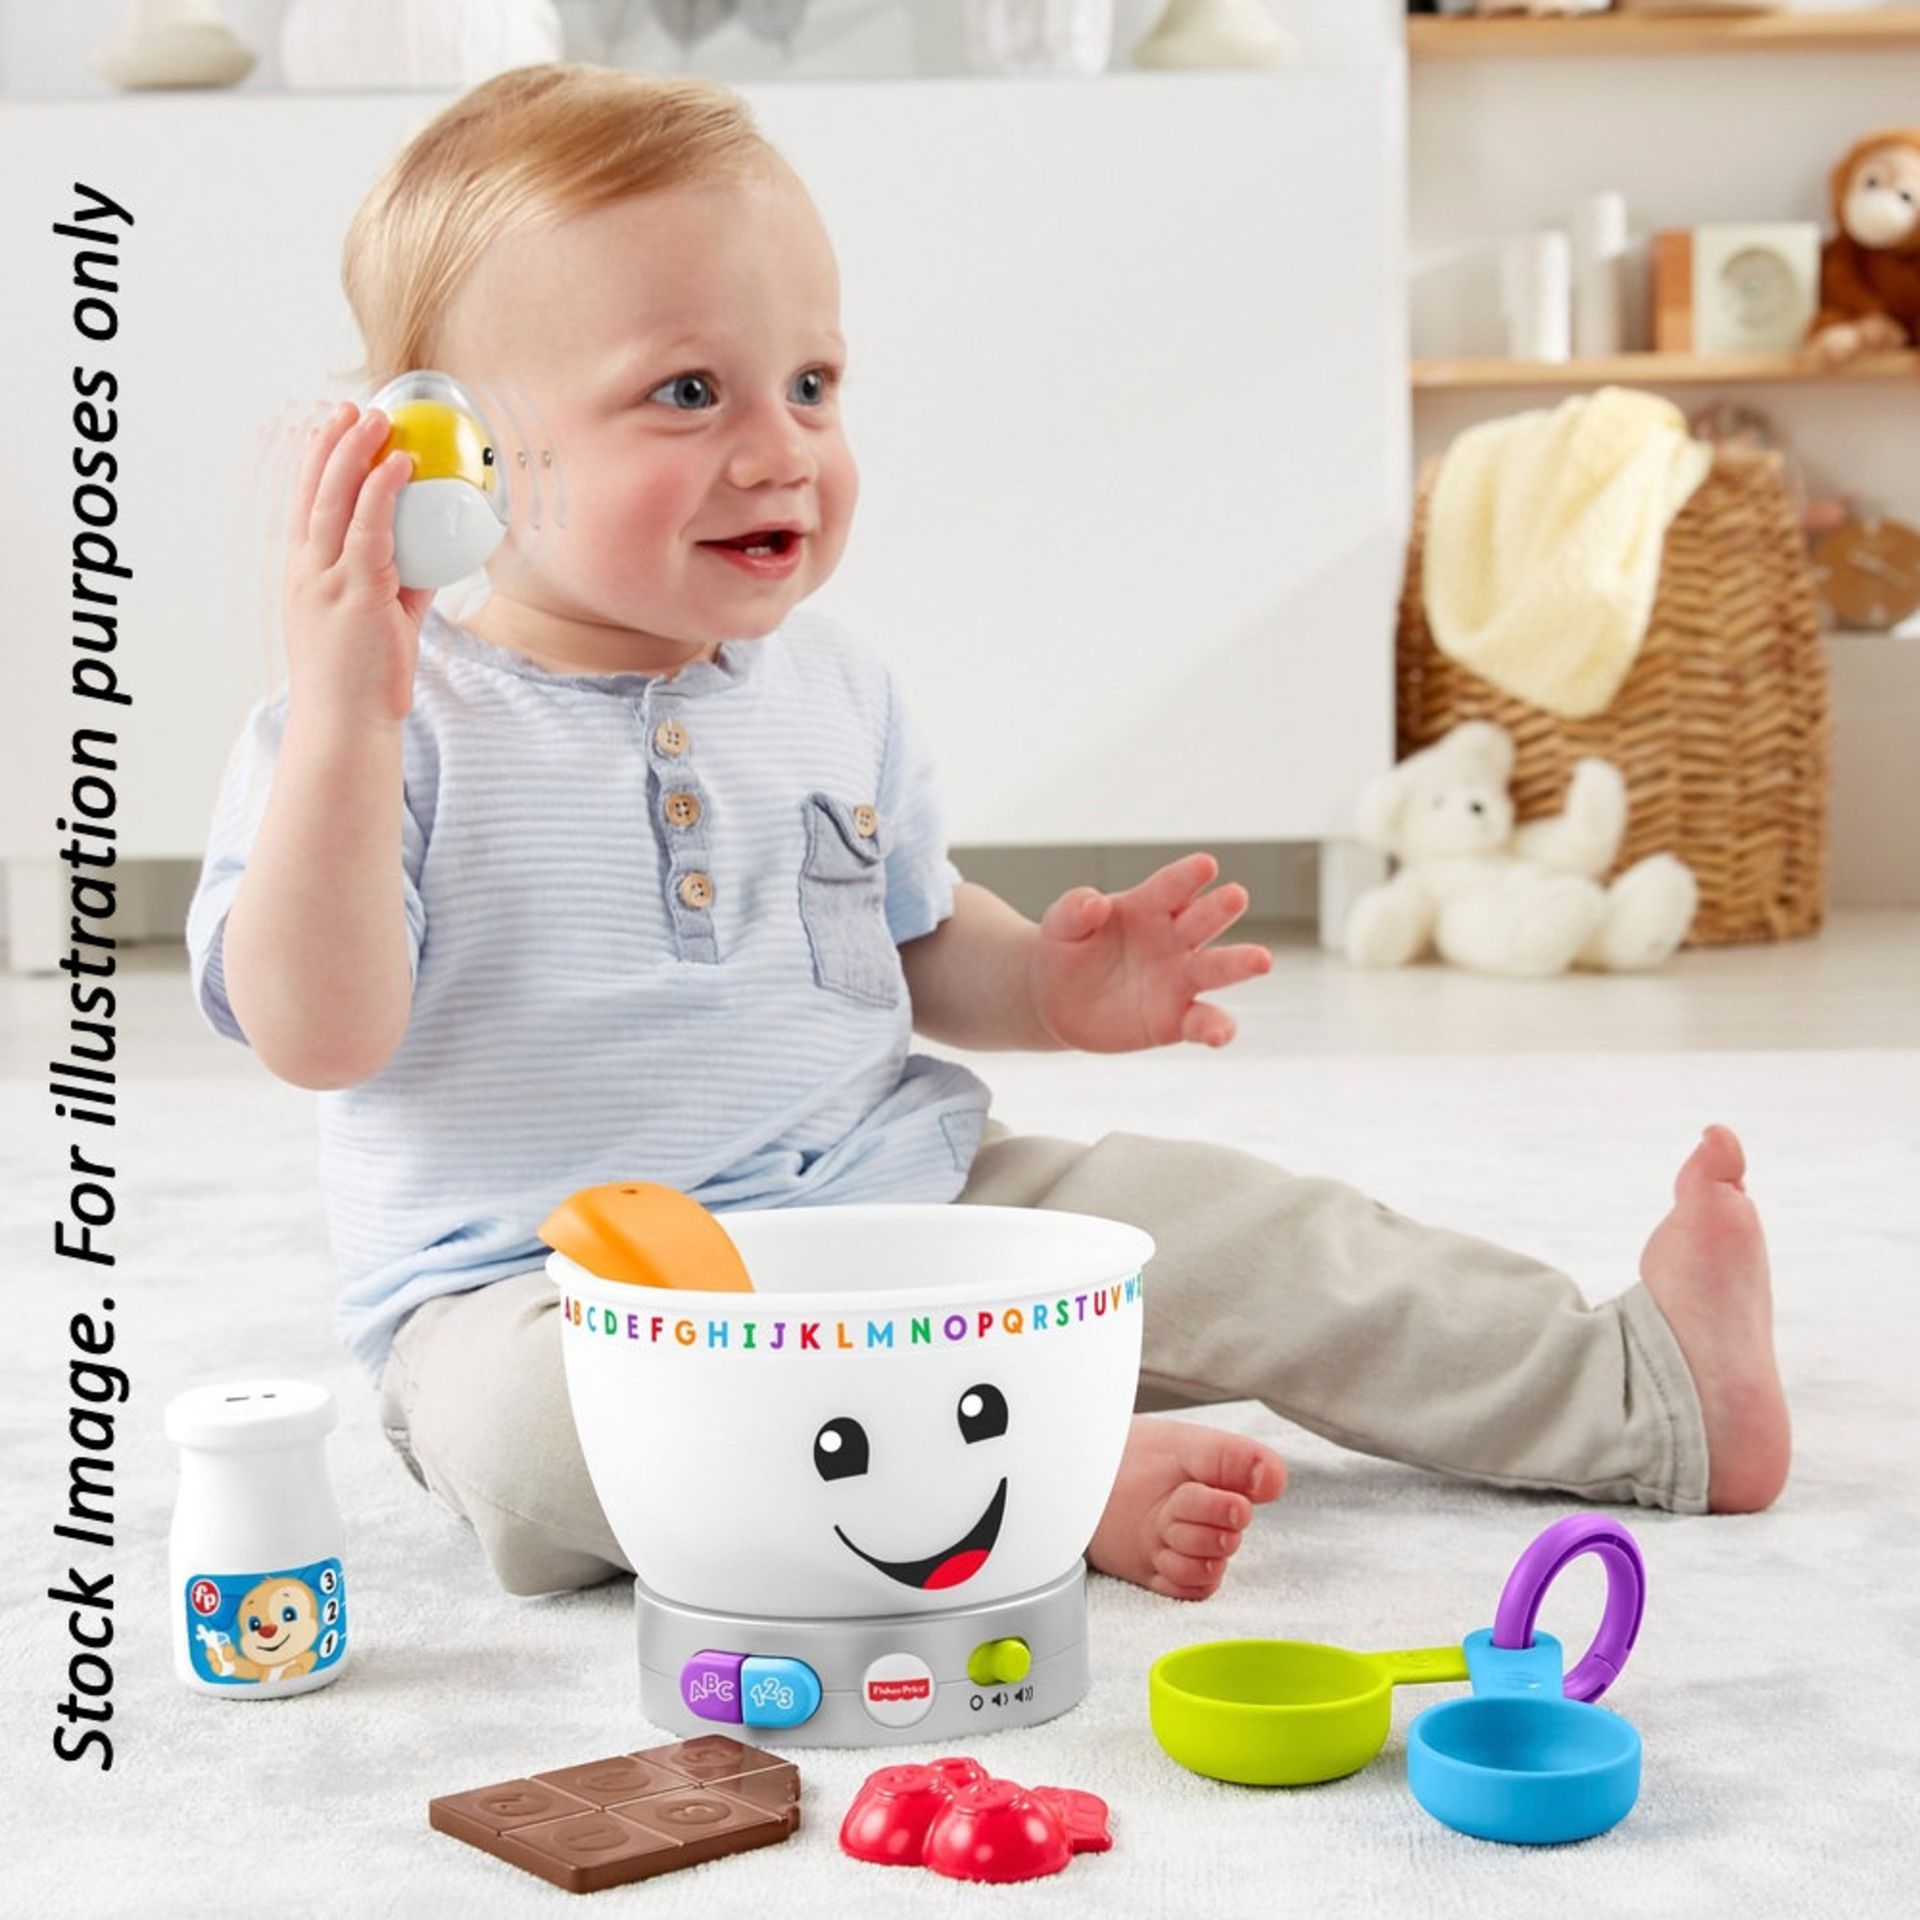 1 x Fisher Price Laugh & Learn Magic Color Mixing Bowl - New/Boxed - HTYS301 - CL987 - Location: